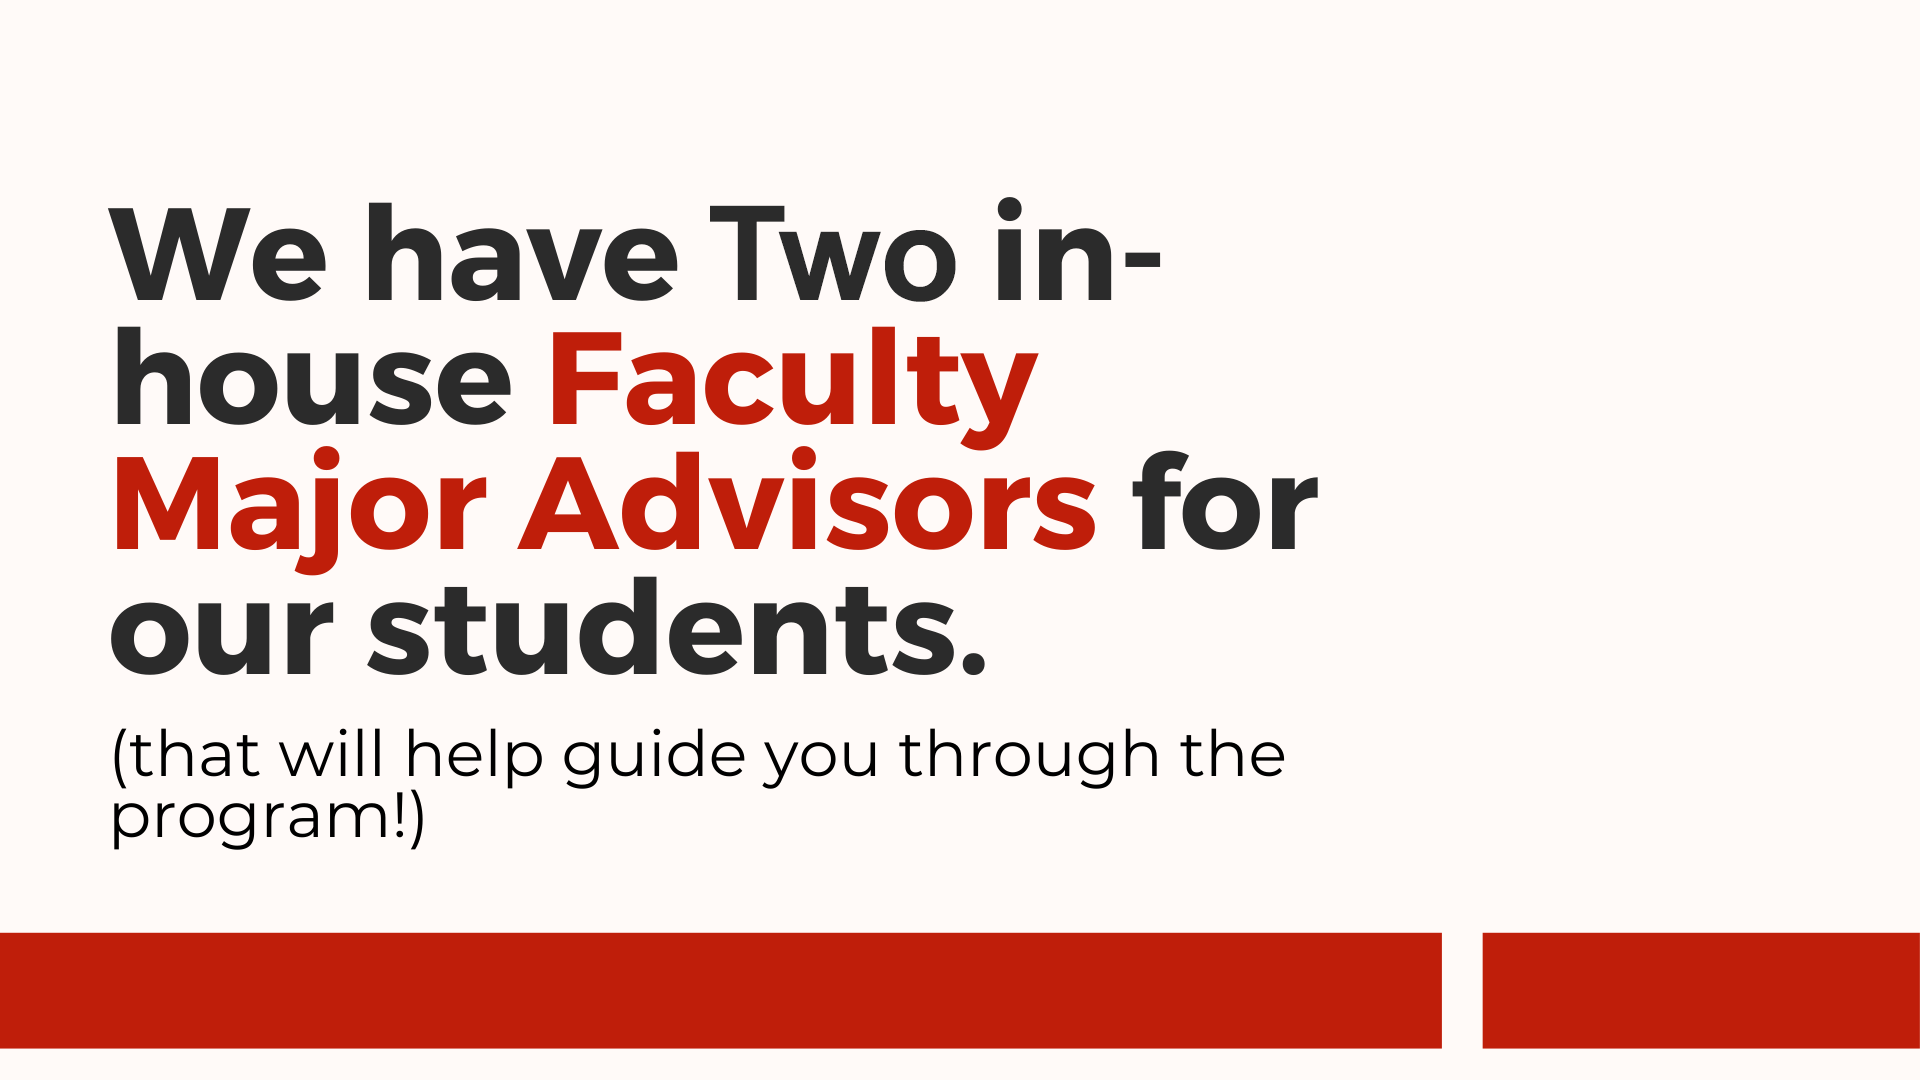 We have two in house faculty major advisors for our students that will help guide you through the program!